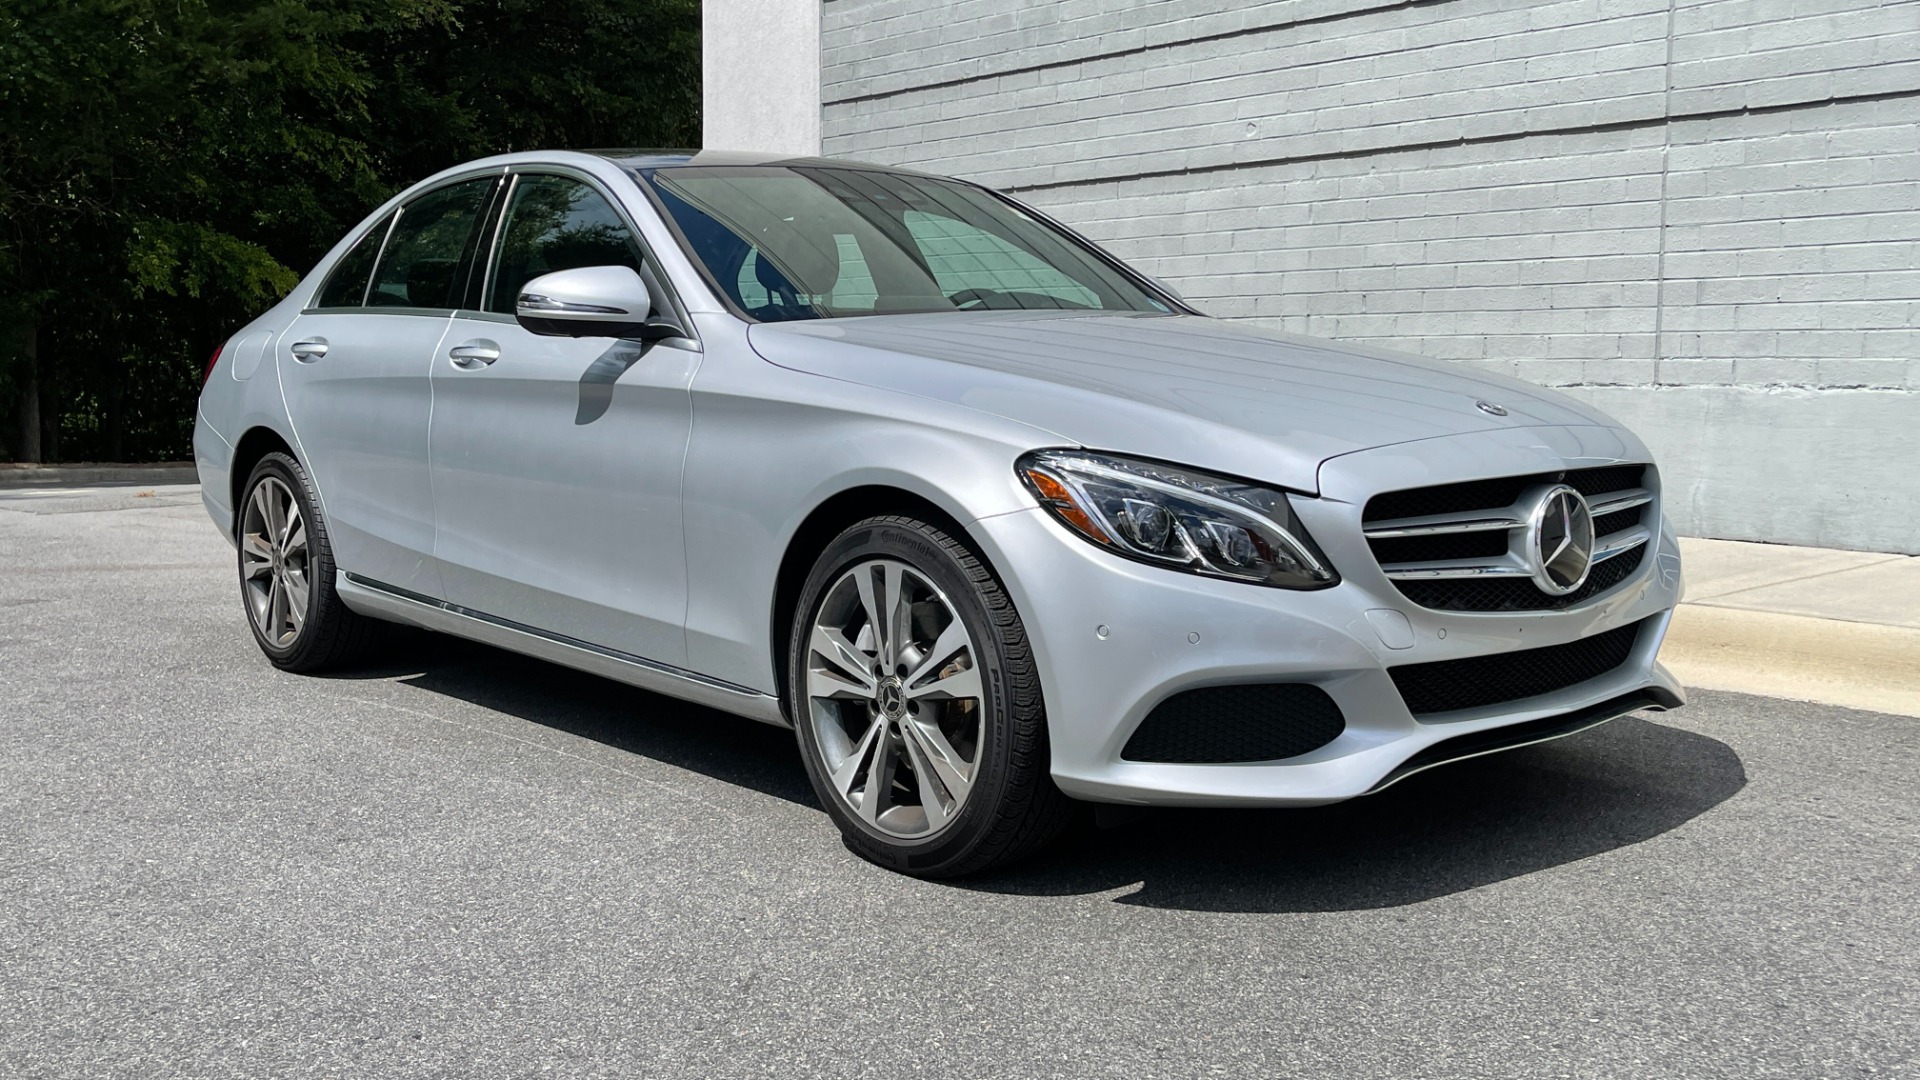 Used 2018 Mercedes-Benz C-Class C300 / PANORAMIC / HEADS UP DISPLAY / ADVANCED LIGHTING / PREMIUM ASSISTANC for sale $30,995 at Formula Imports in Charlotte NC 28227 6